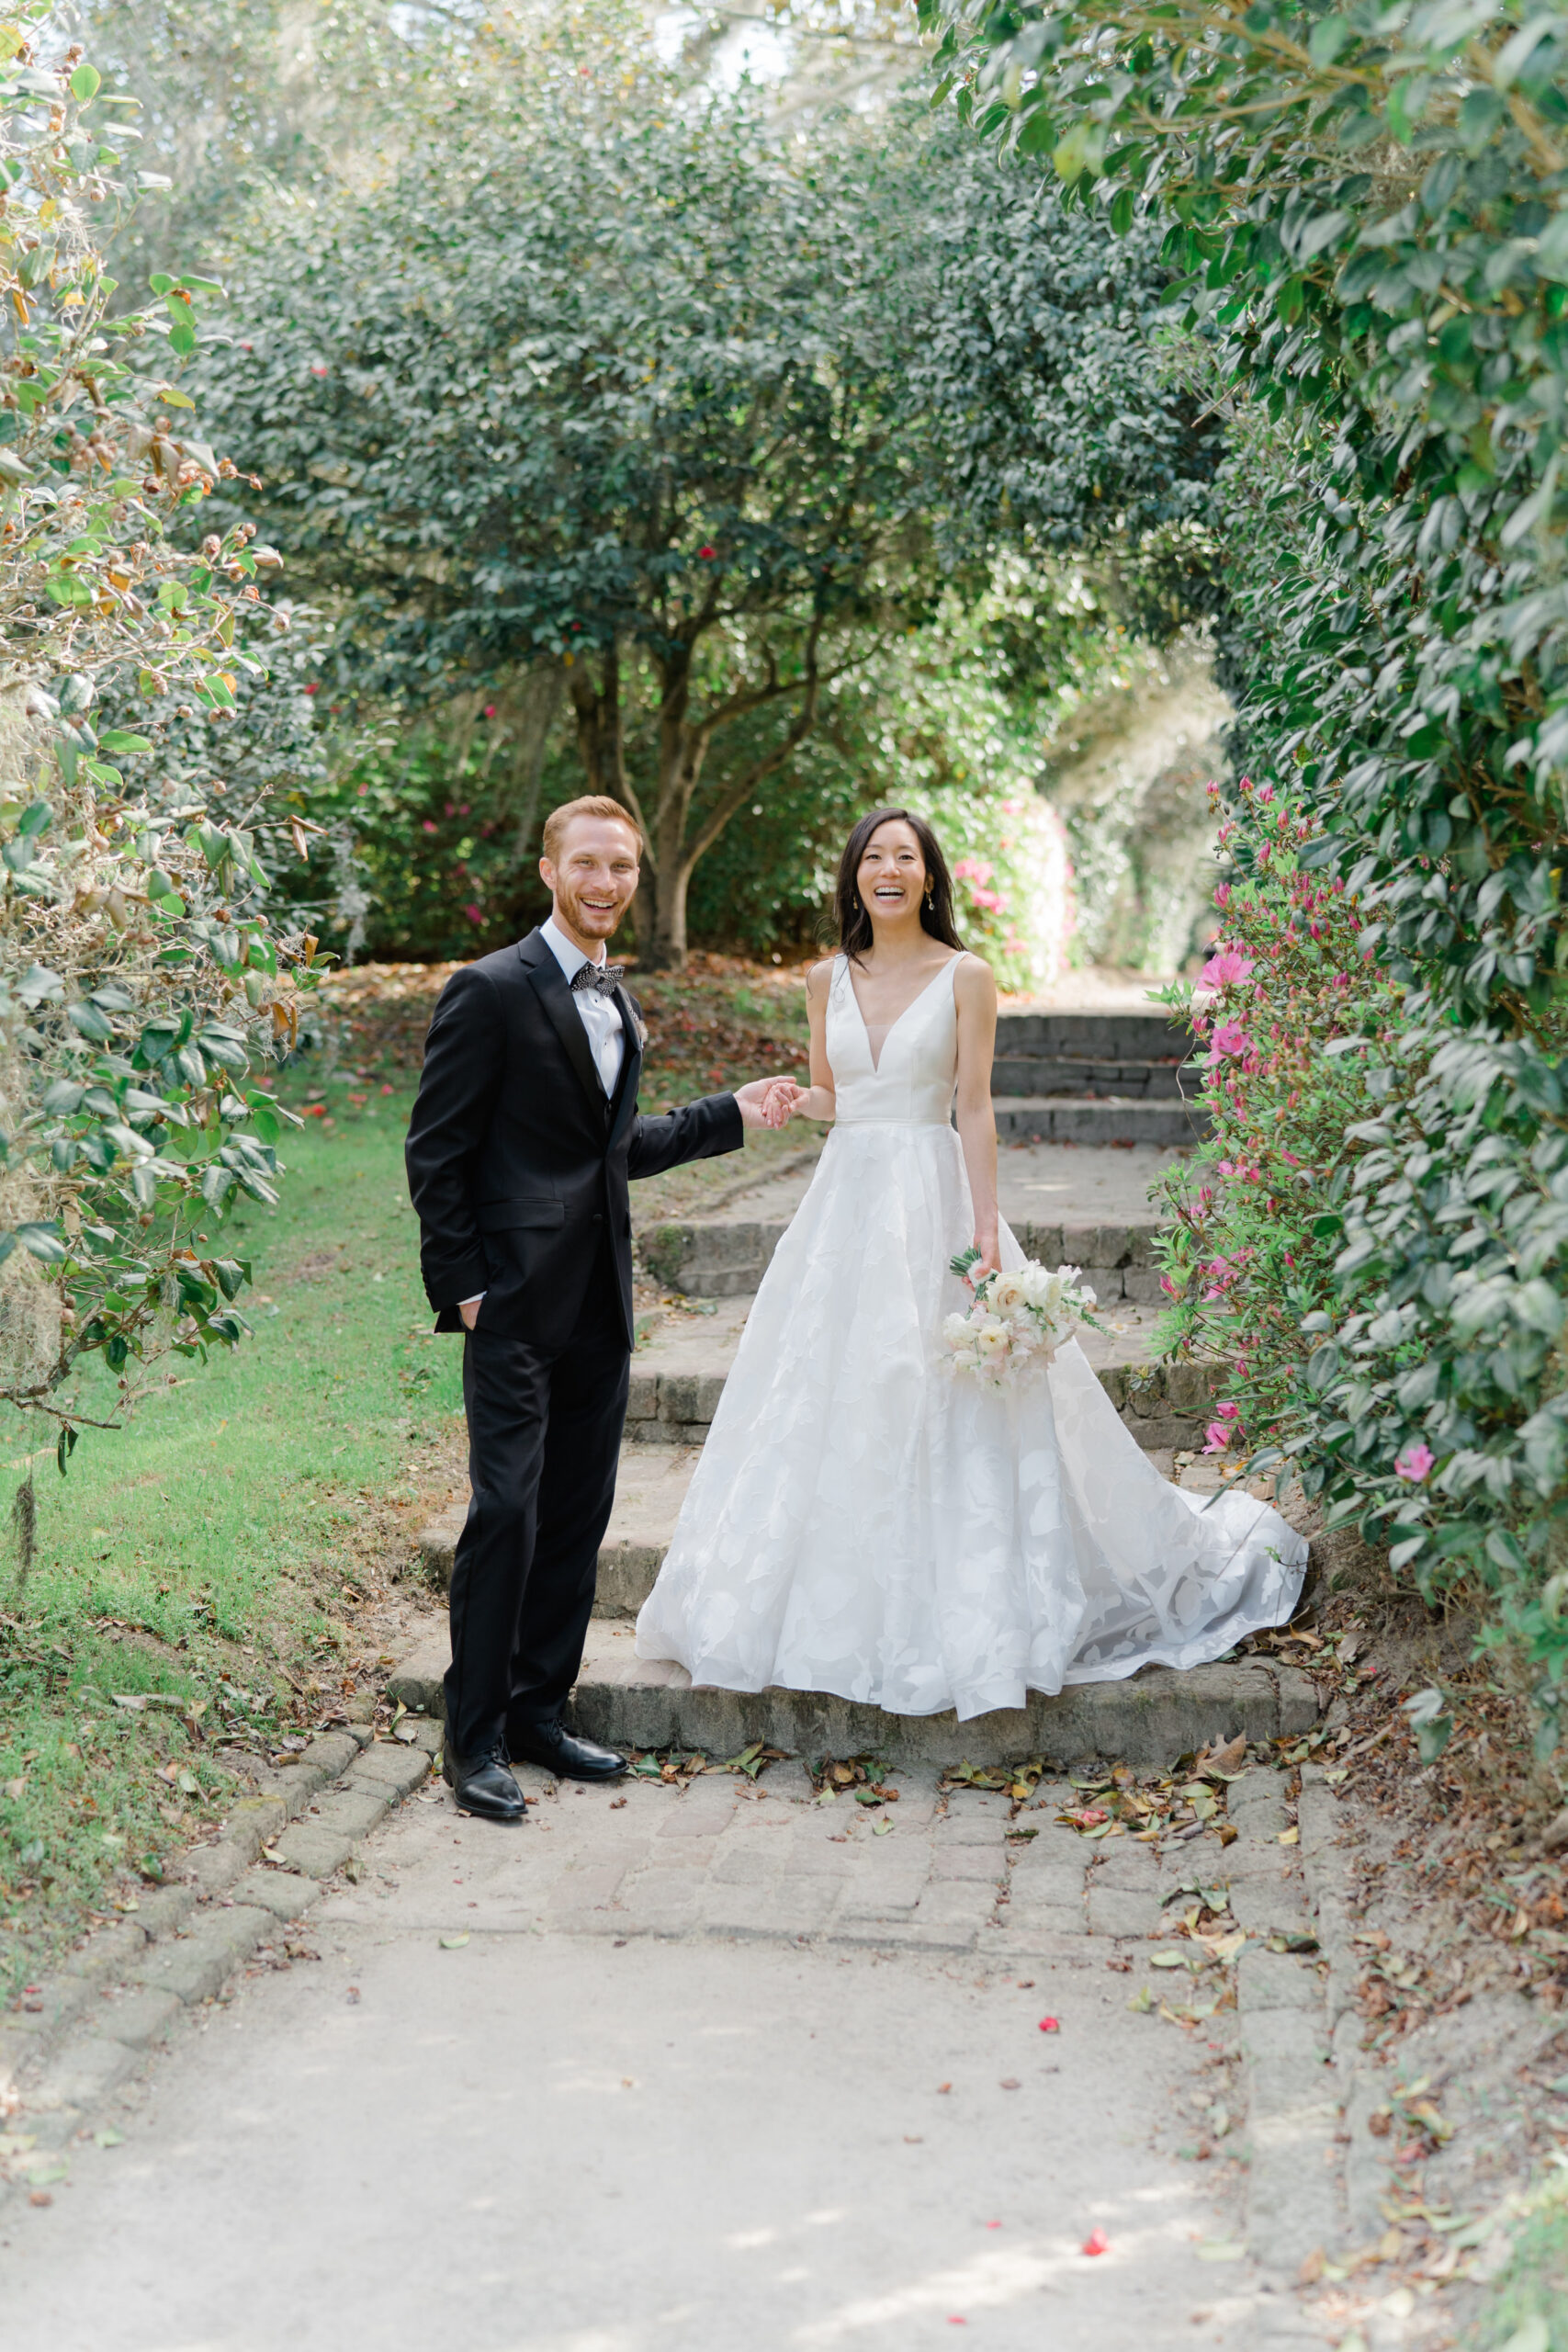 Groom leads the bride down the steps in Middleton Place gardens. Lush greenery and flower blooms. charleston photographer wedding.